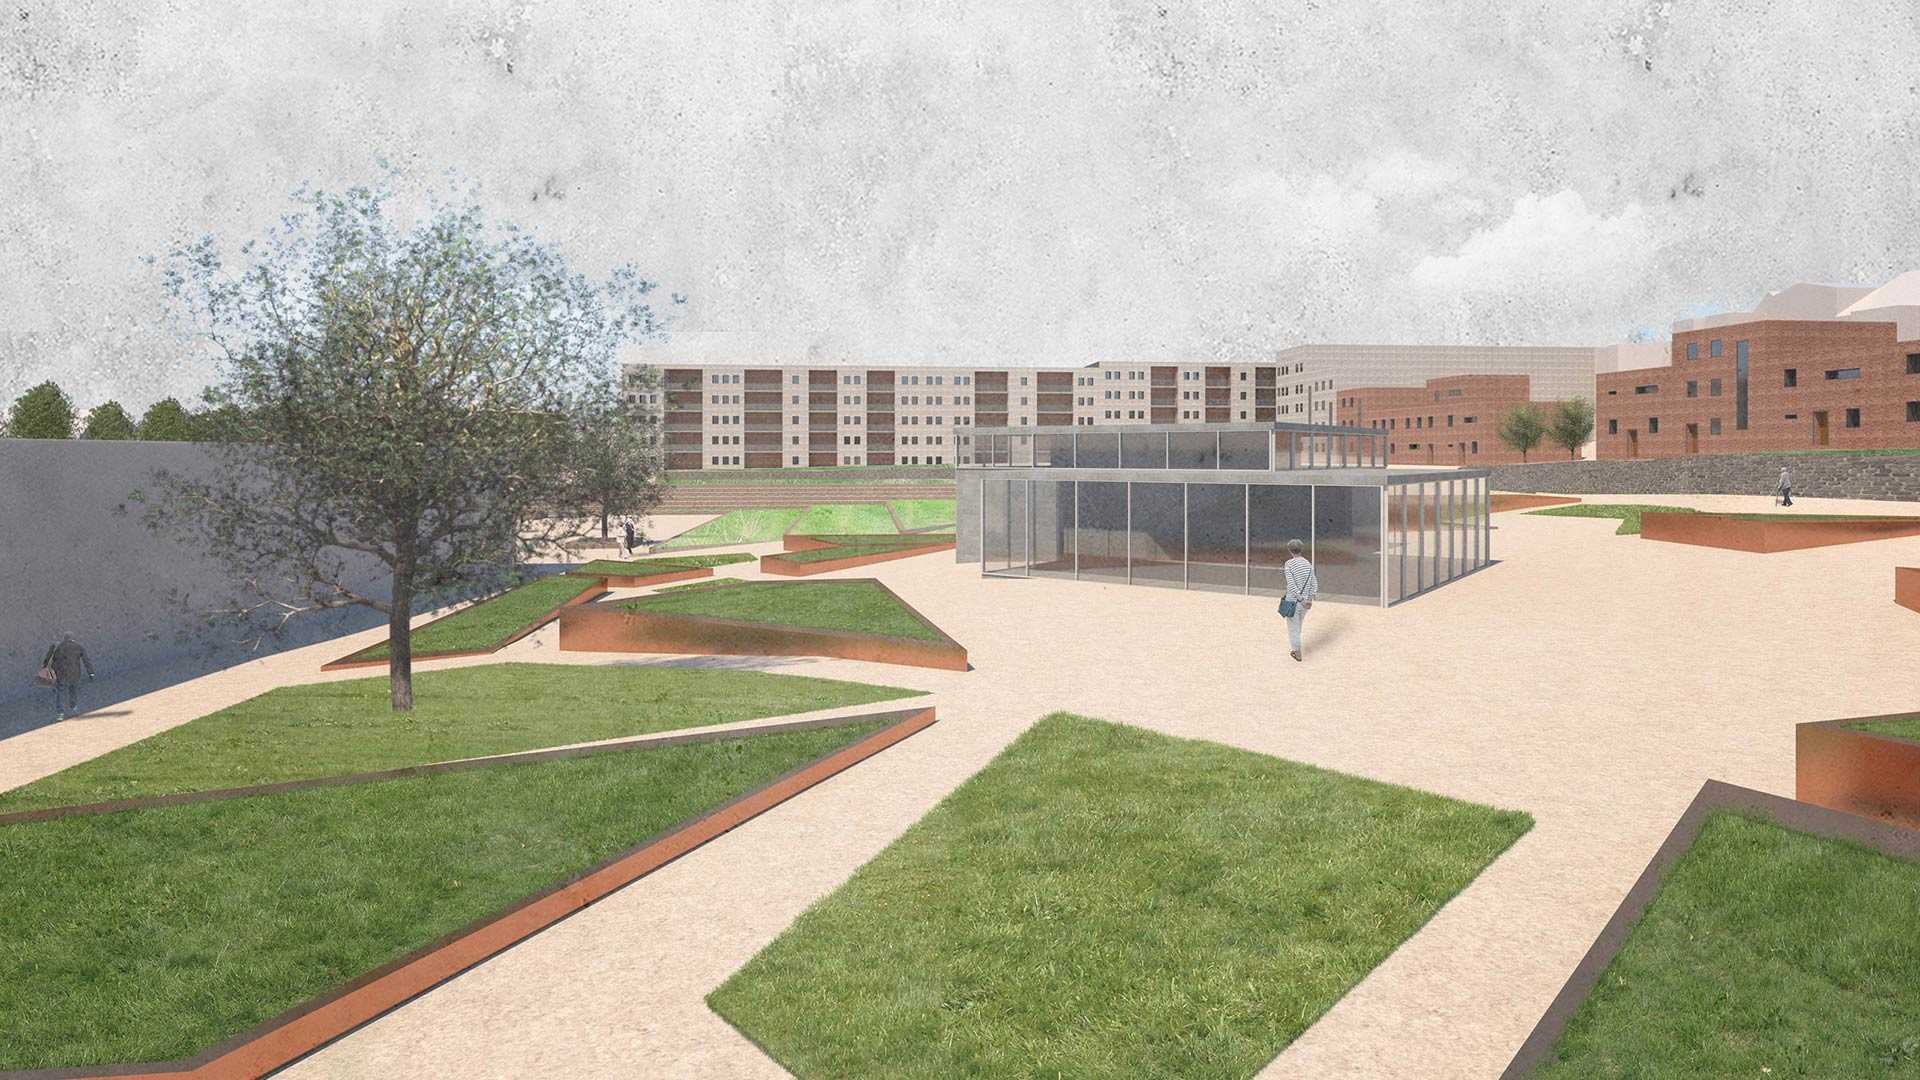 visualization of a planned museum in the new park